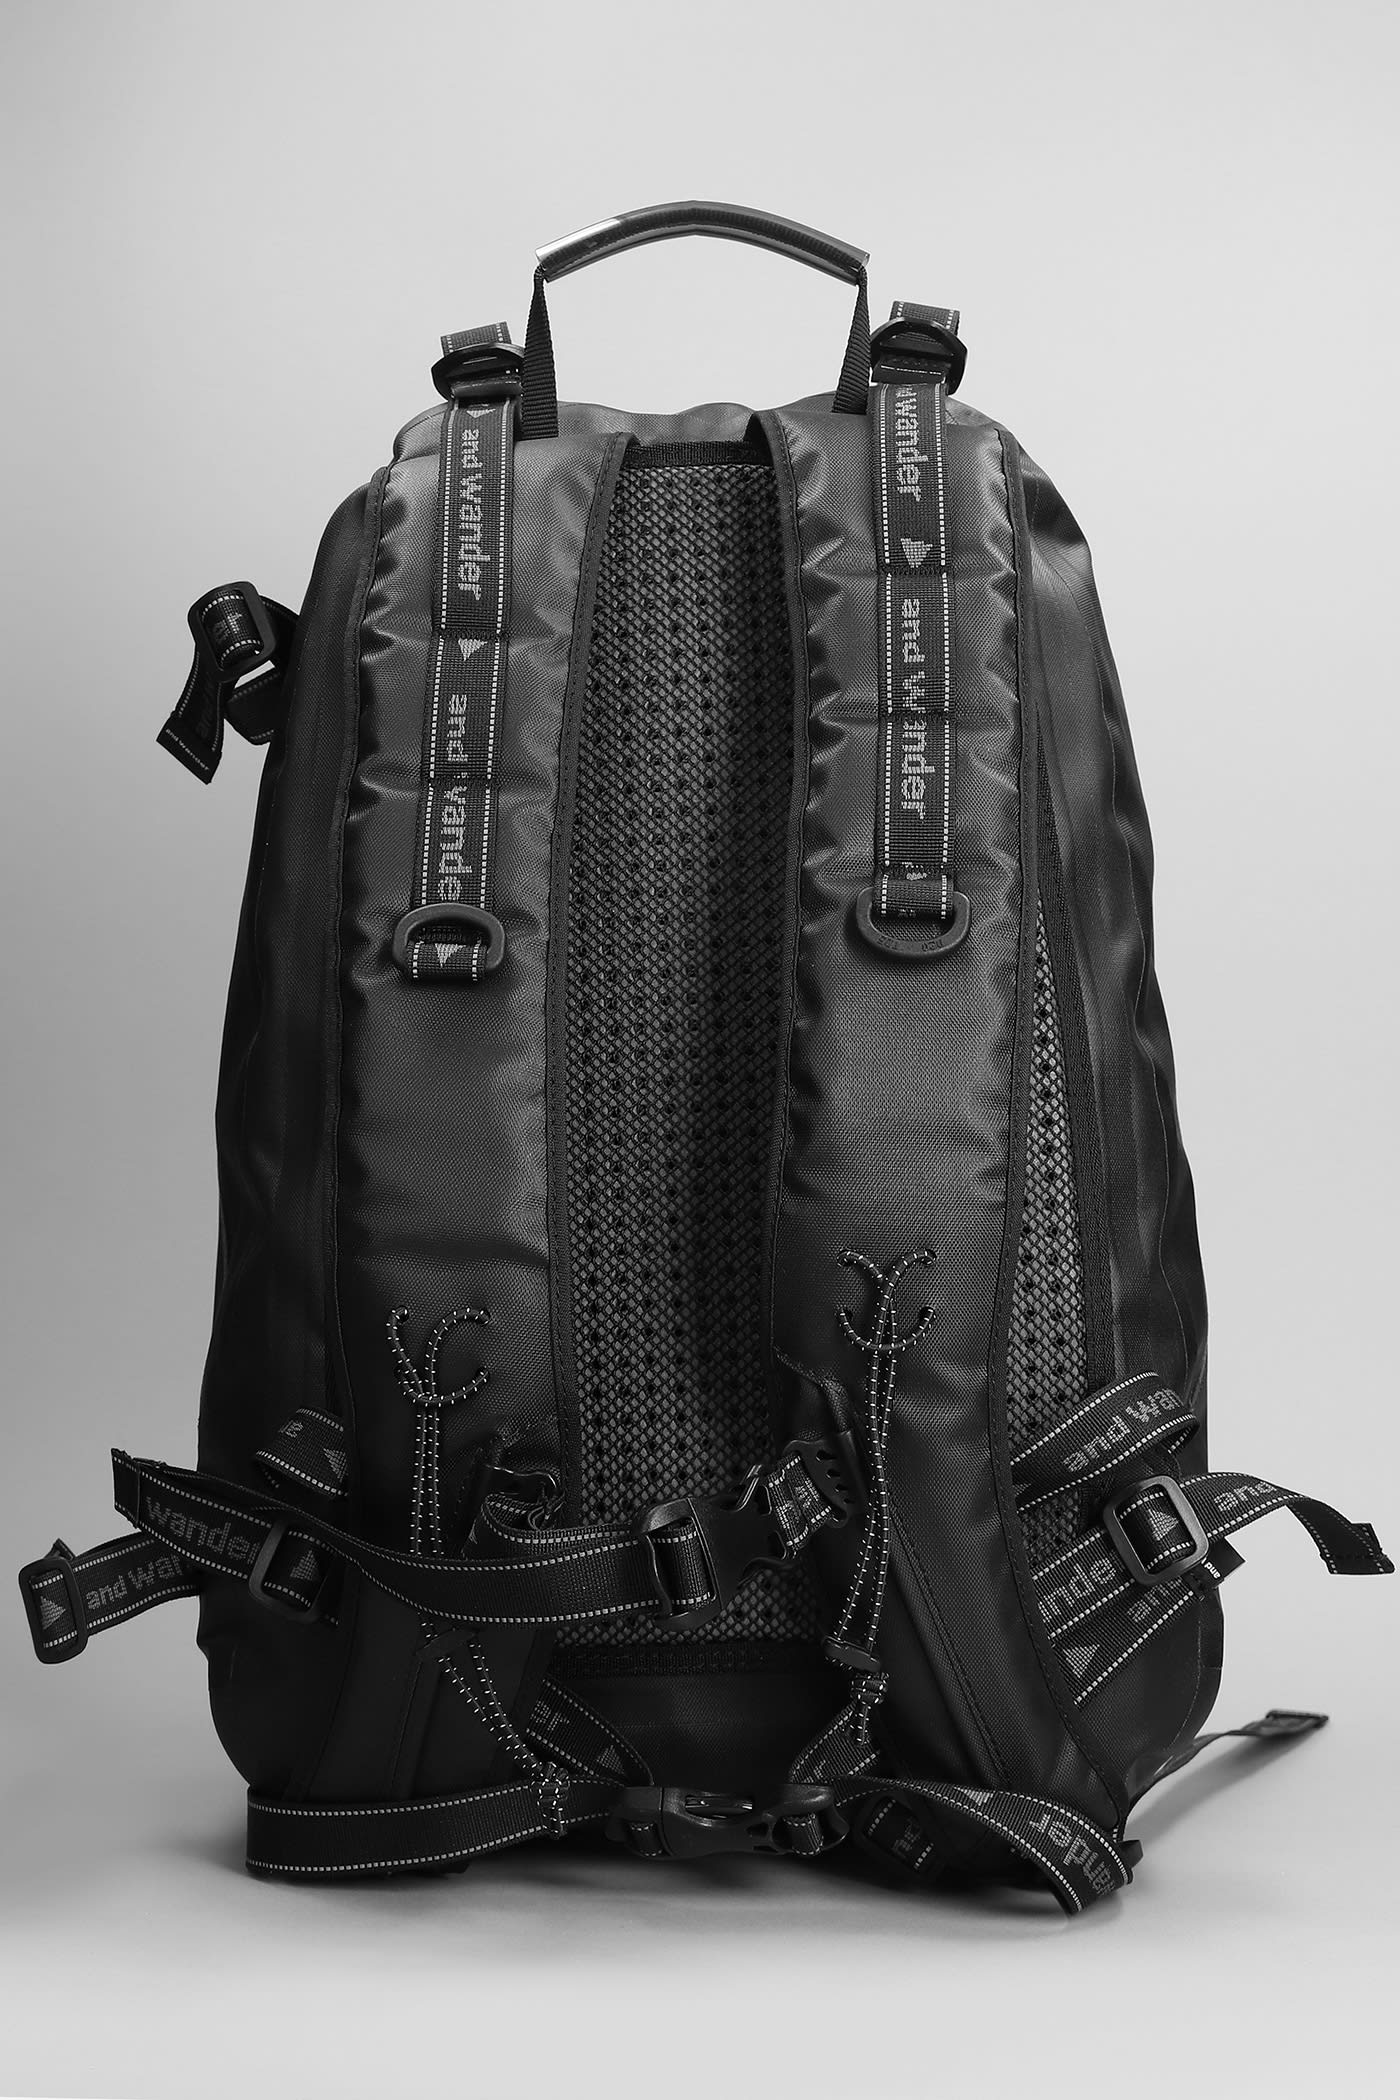 Shop And Wander Backpack In Black Nylon